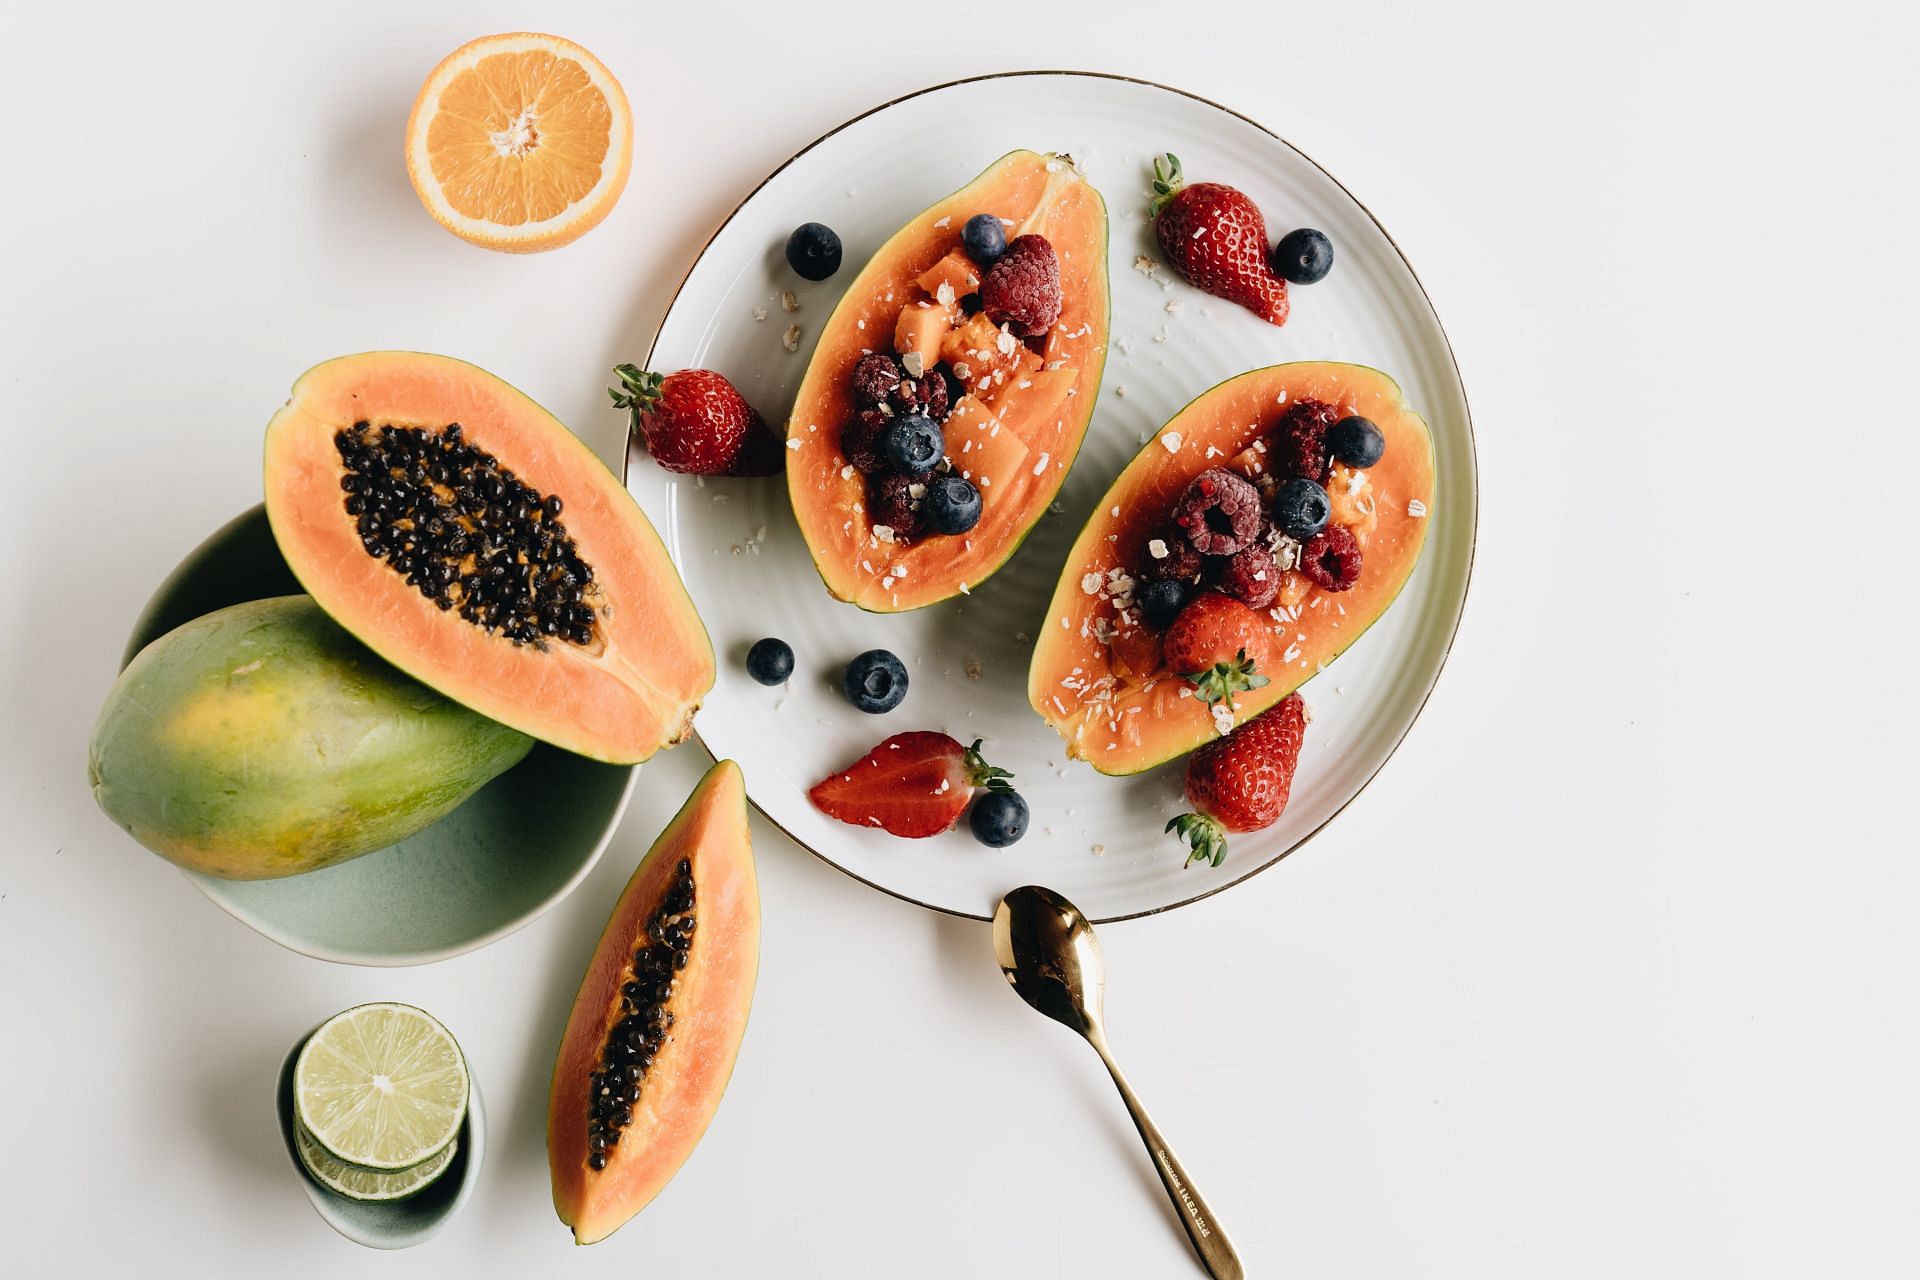 Fruits for empty stomach (Image sourced via Pexels / Photo by alleksana)